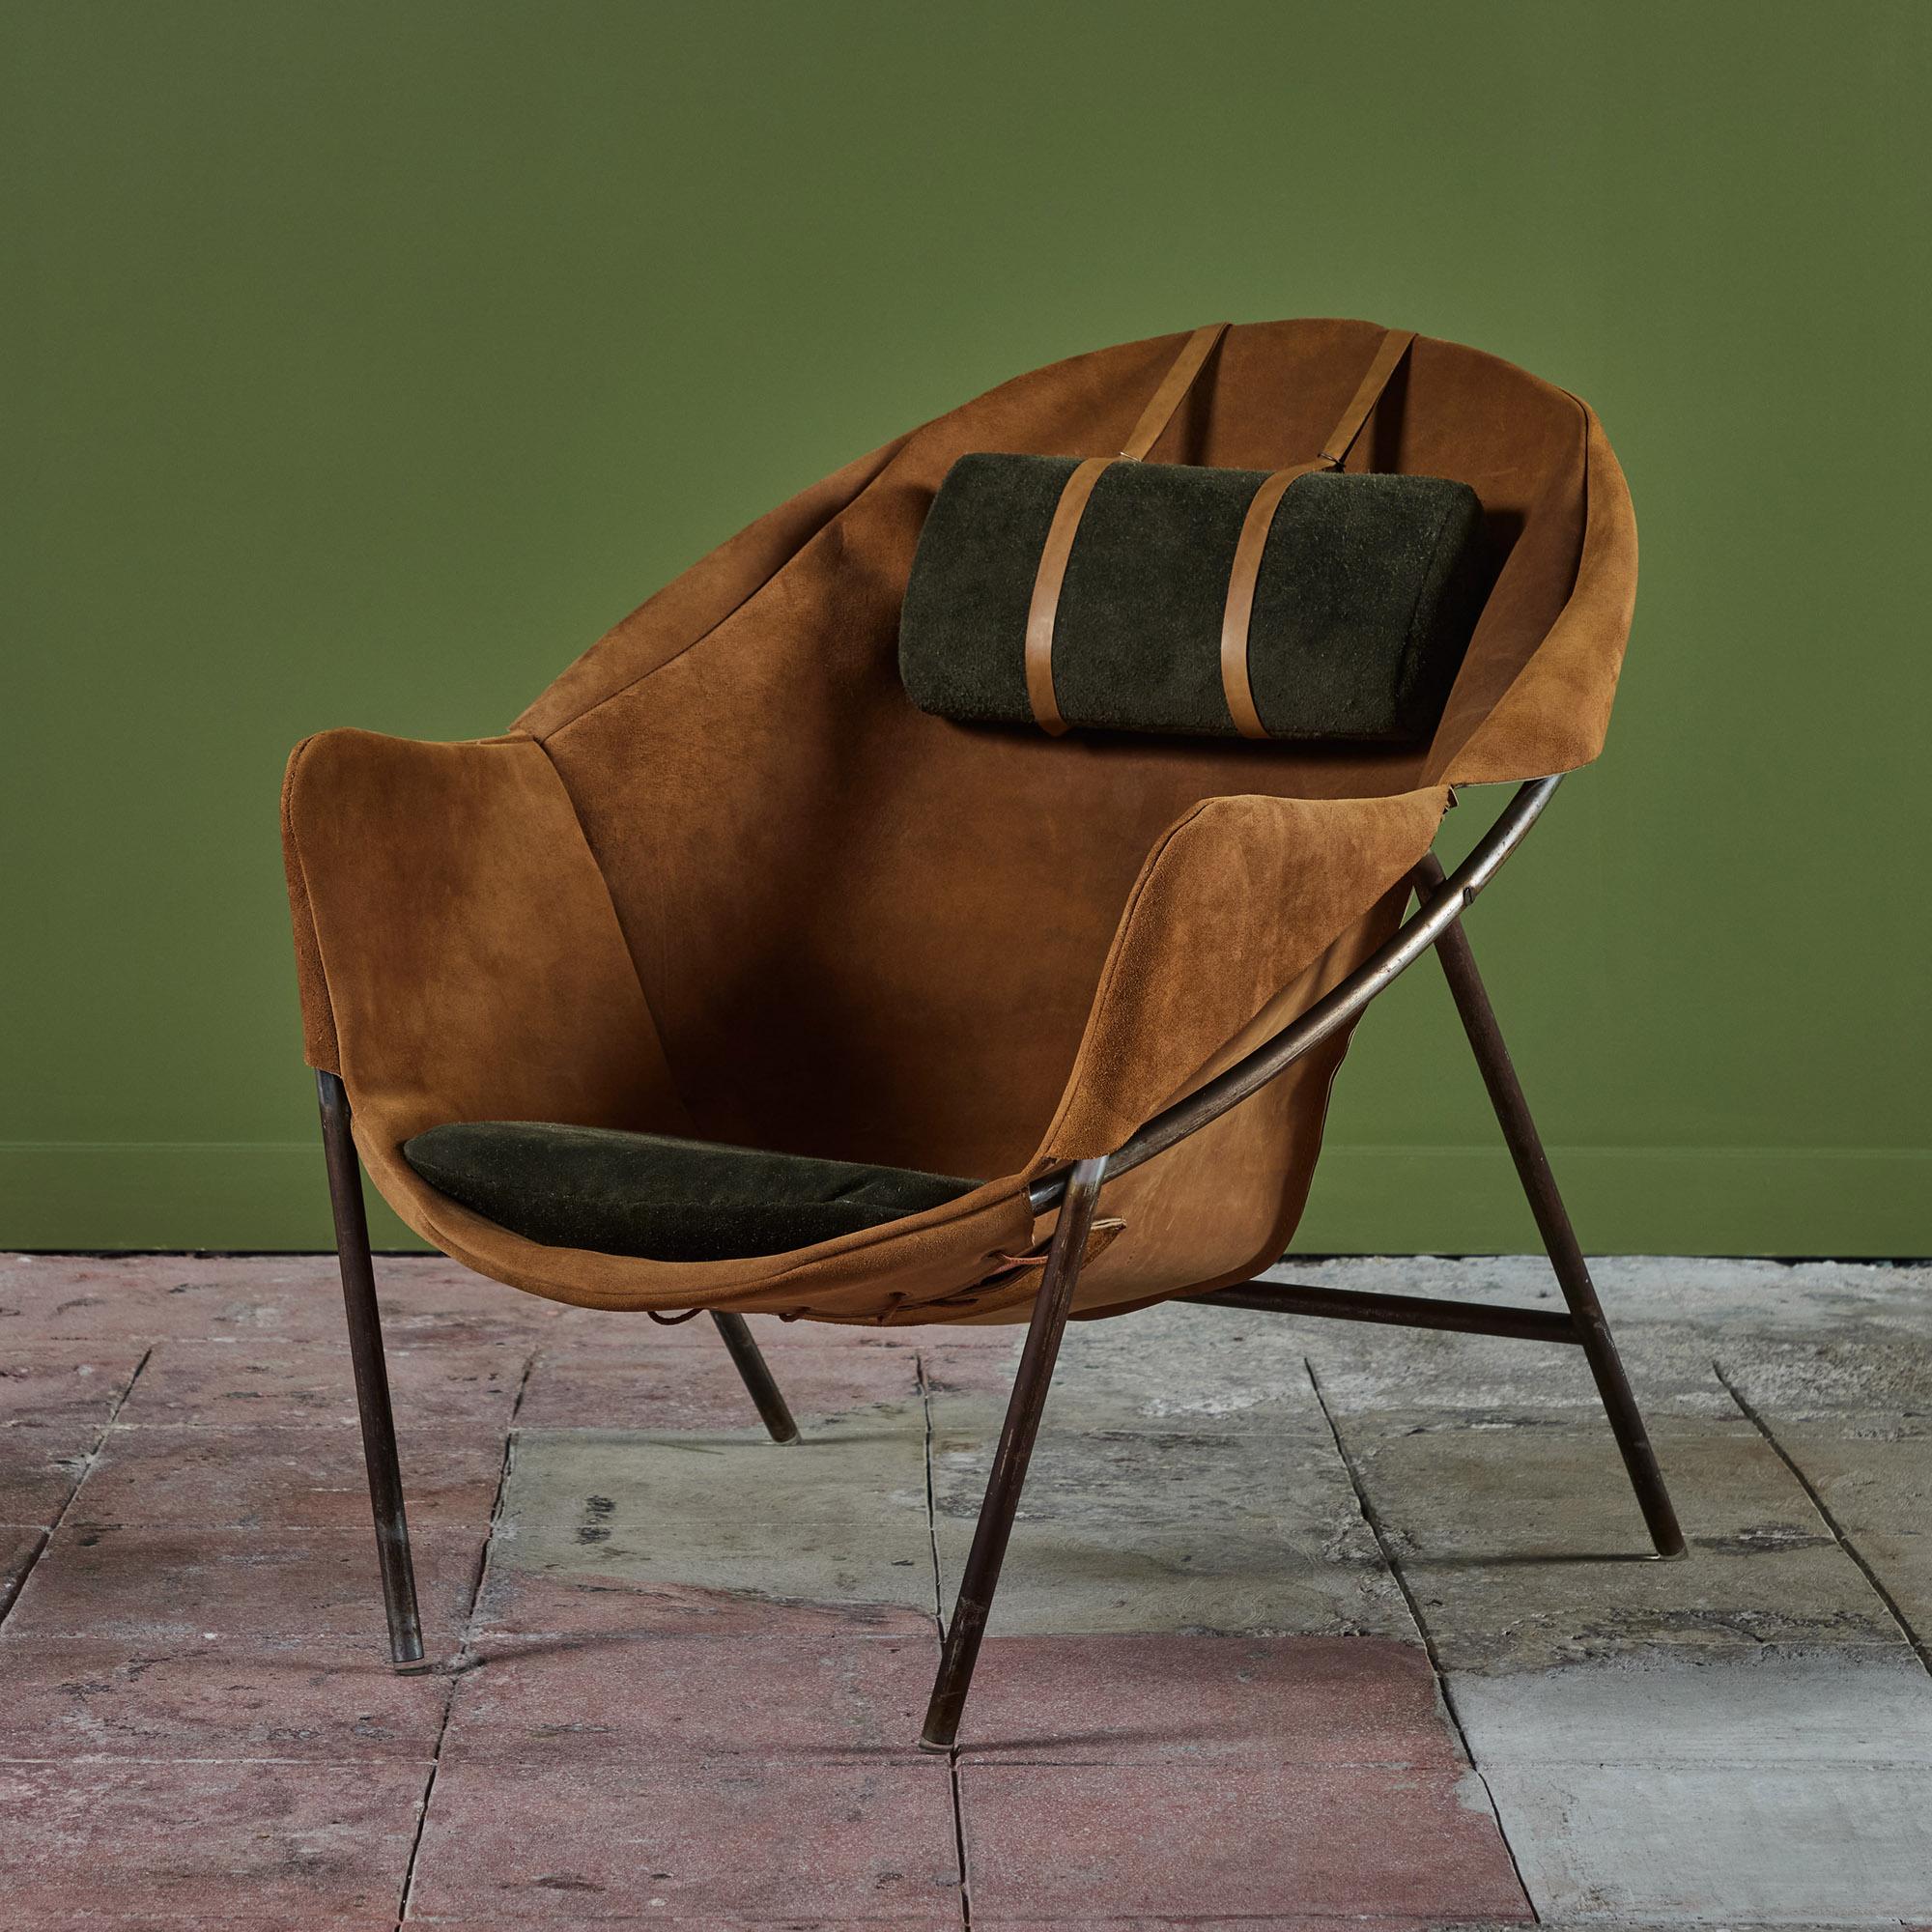 Easy lounge chair by Erik Ole Jorgensen for Bovirke, c.1950's, Denmark. This lounge chair features a patinated chrome frame with suede sling chair in camel. The chair also showcases a dark green seat cushion and head pillow.

Dimensions
30